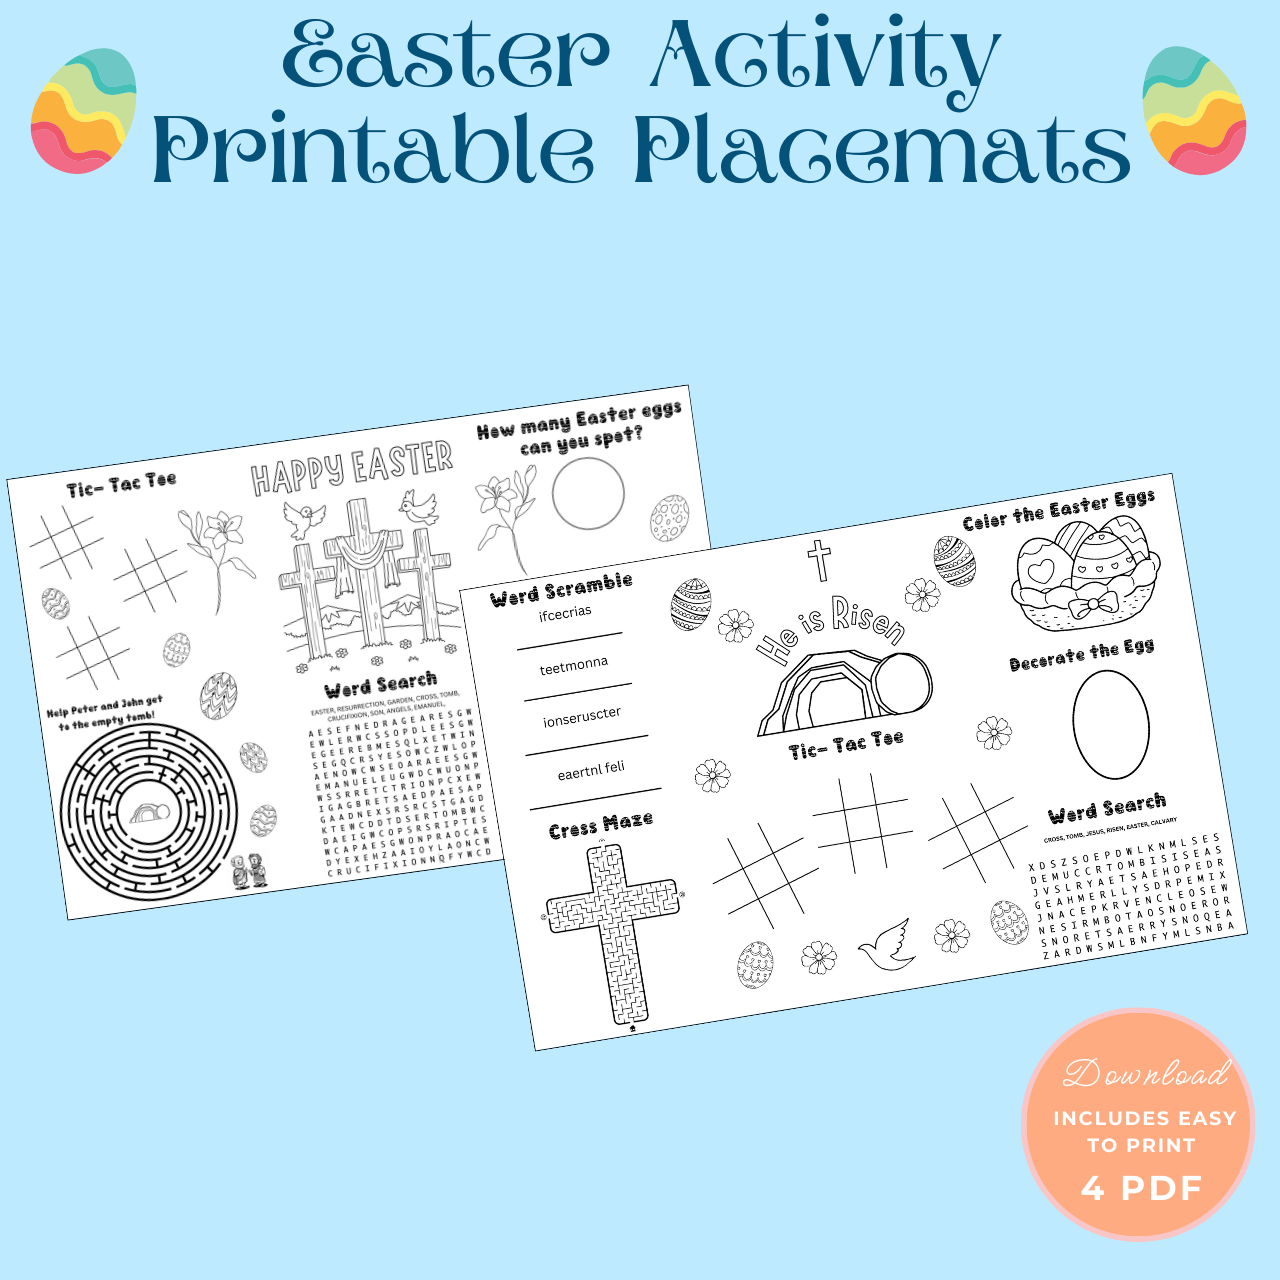 Christian Easter Activity Placemat | Easter Placemat Activity Sheet | Christian Easter Kids Activities | 8.5x11 in & 11x17 in